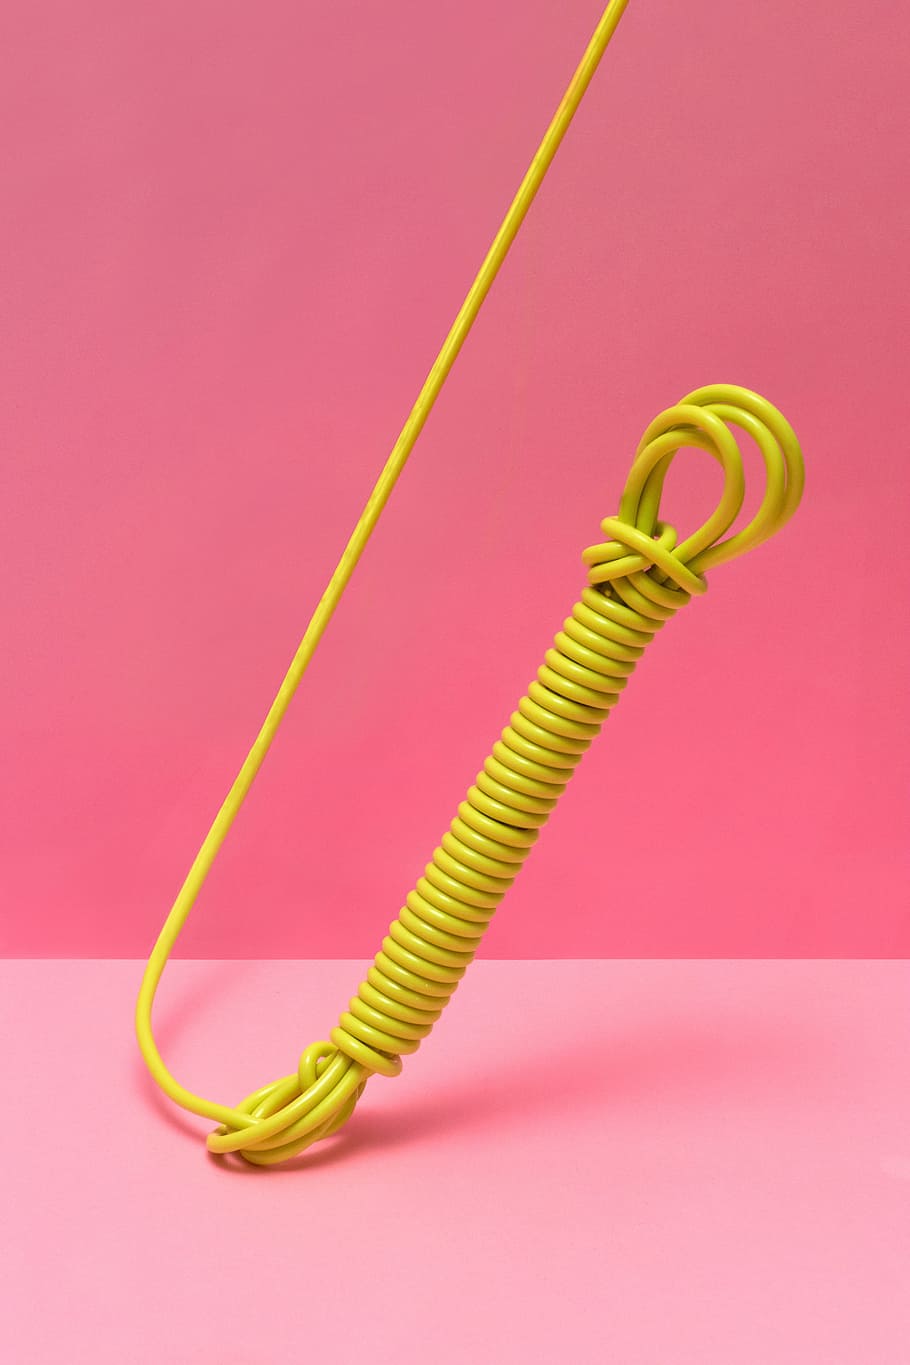 pink, background, yellow, wire, colored background, studio shot, cable, single object, pink background, indoors